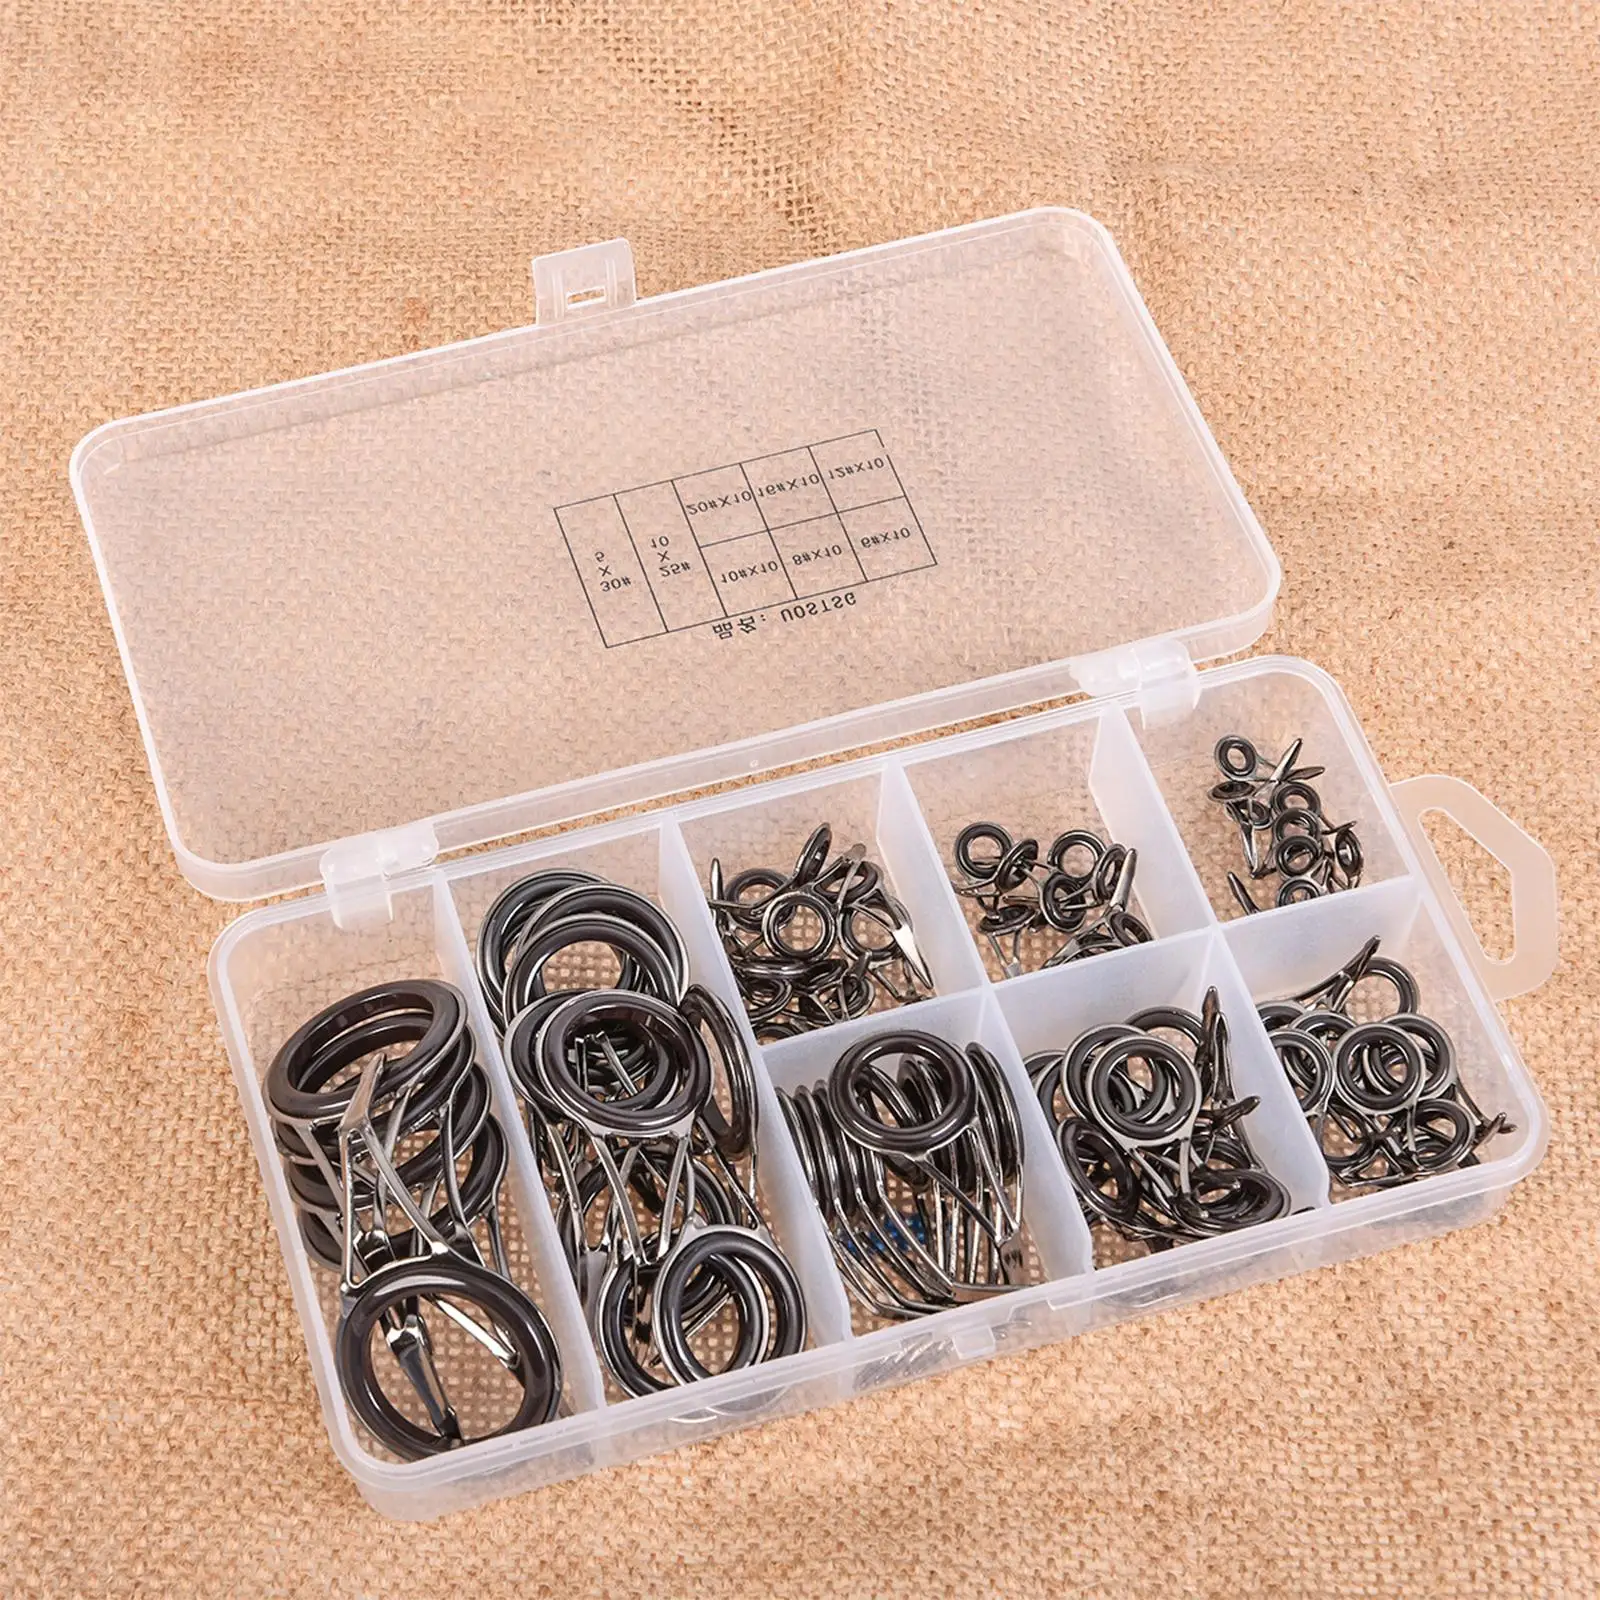 75x Fishing Rod Tip Guide Rings Set Stainless Steel Mixed Size in A Box